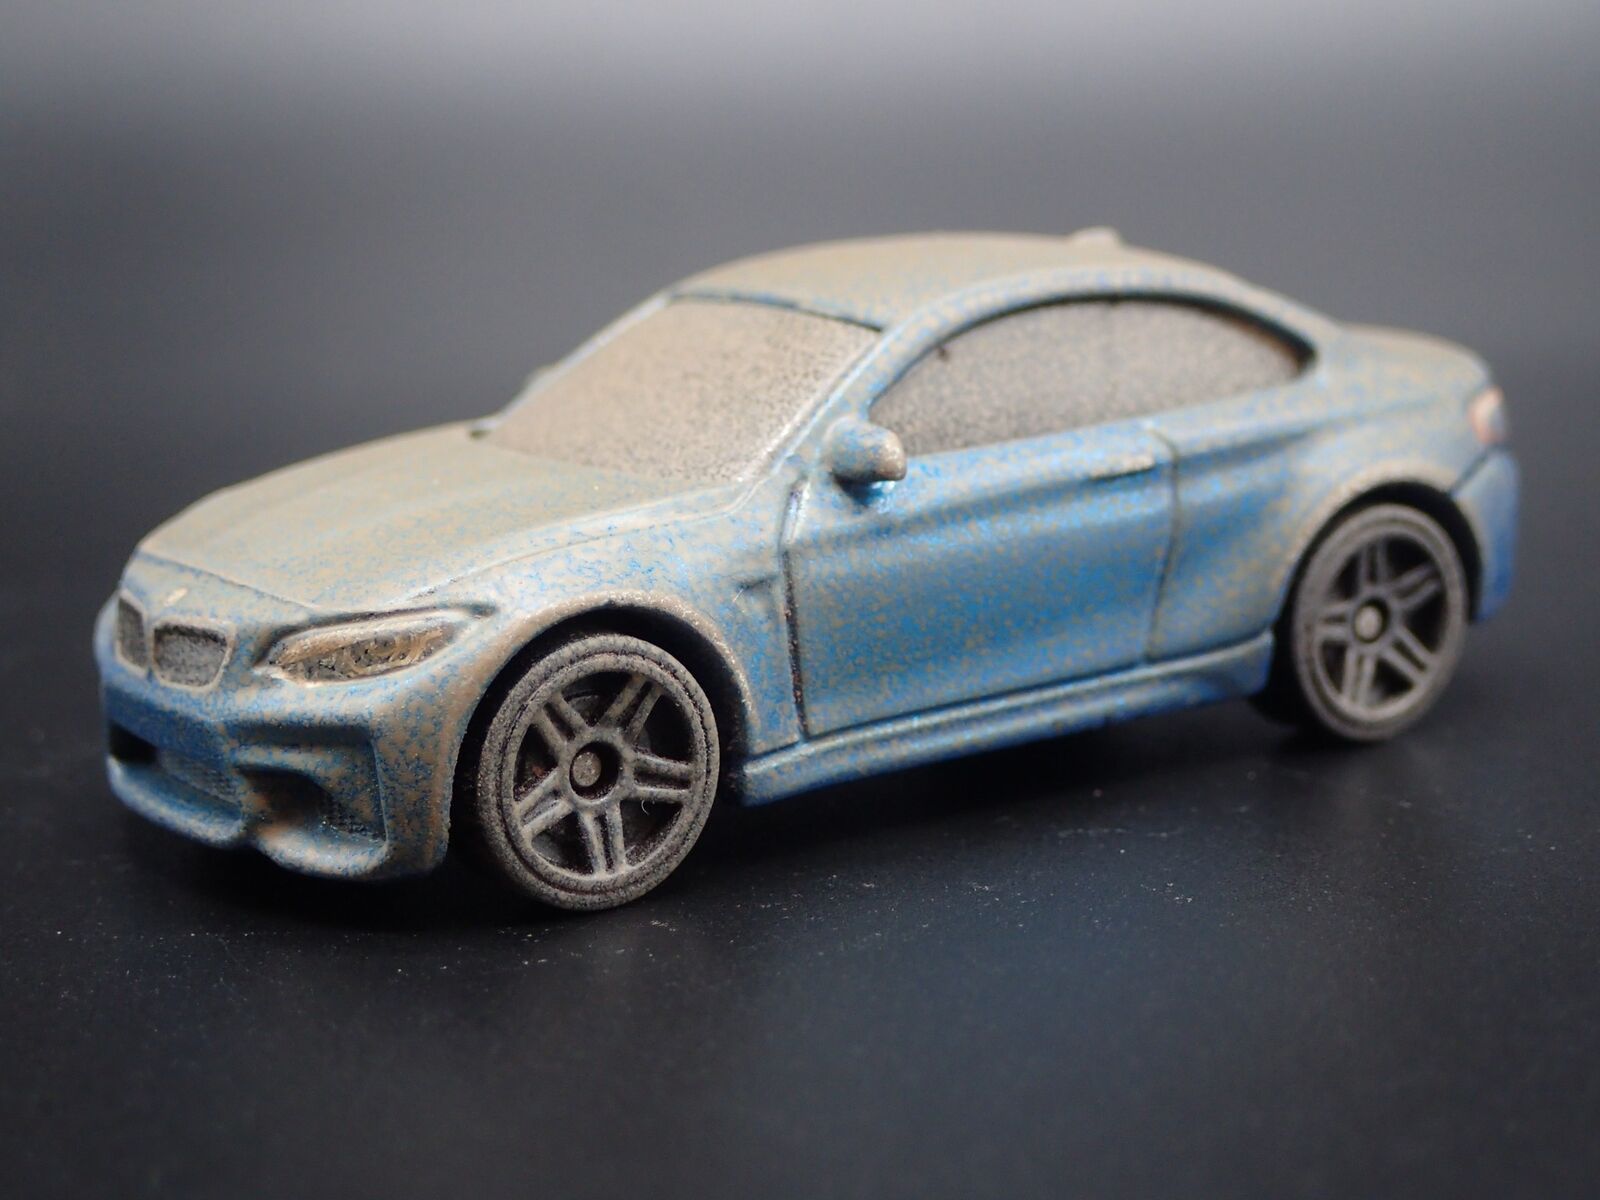 2016-2020 BMW M2 COUPE CUSTOM ABANDONED 1:64 SCALE DIORAMA DIECAST relisted